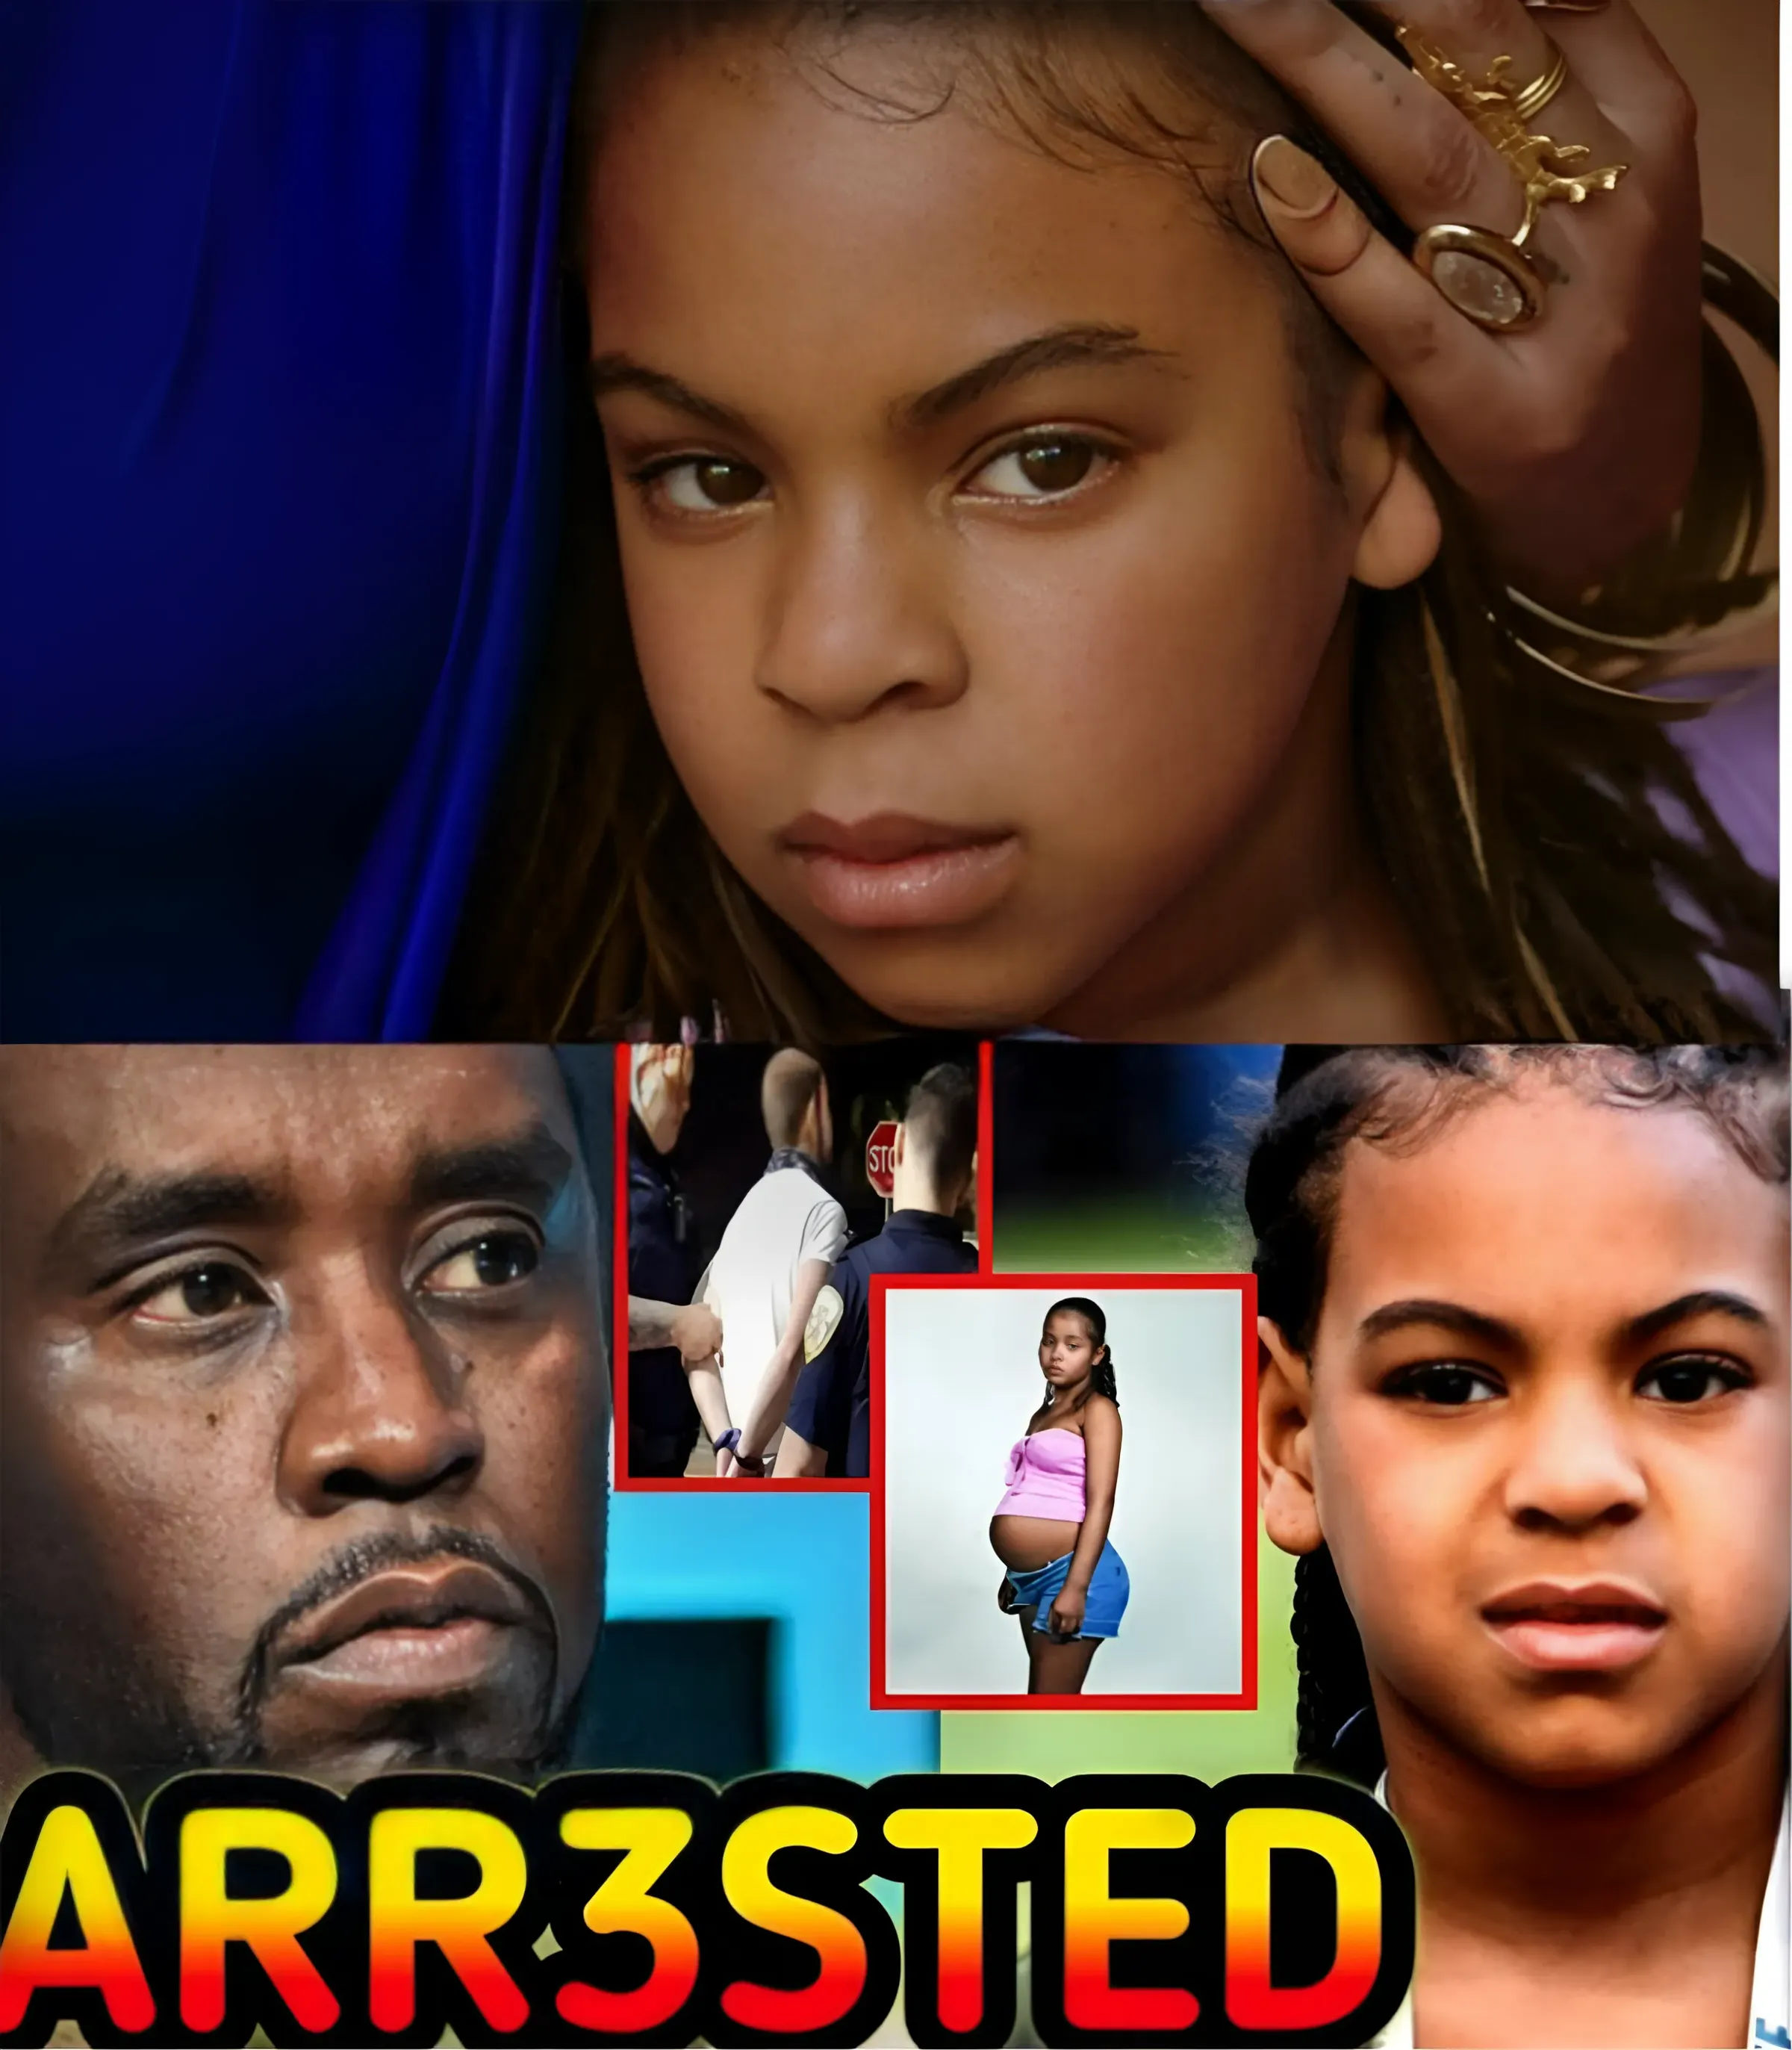 Blue Ivy revealed the person who pressured her and sex**lly ab*sed her. The sentence given to the criminal: "15 years in prison"